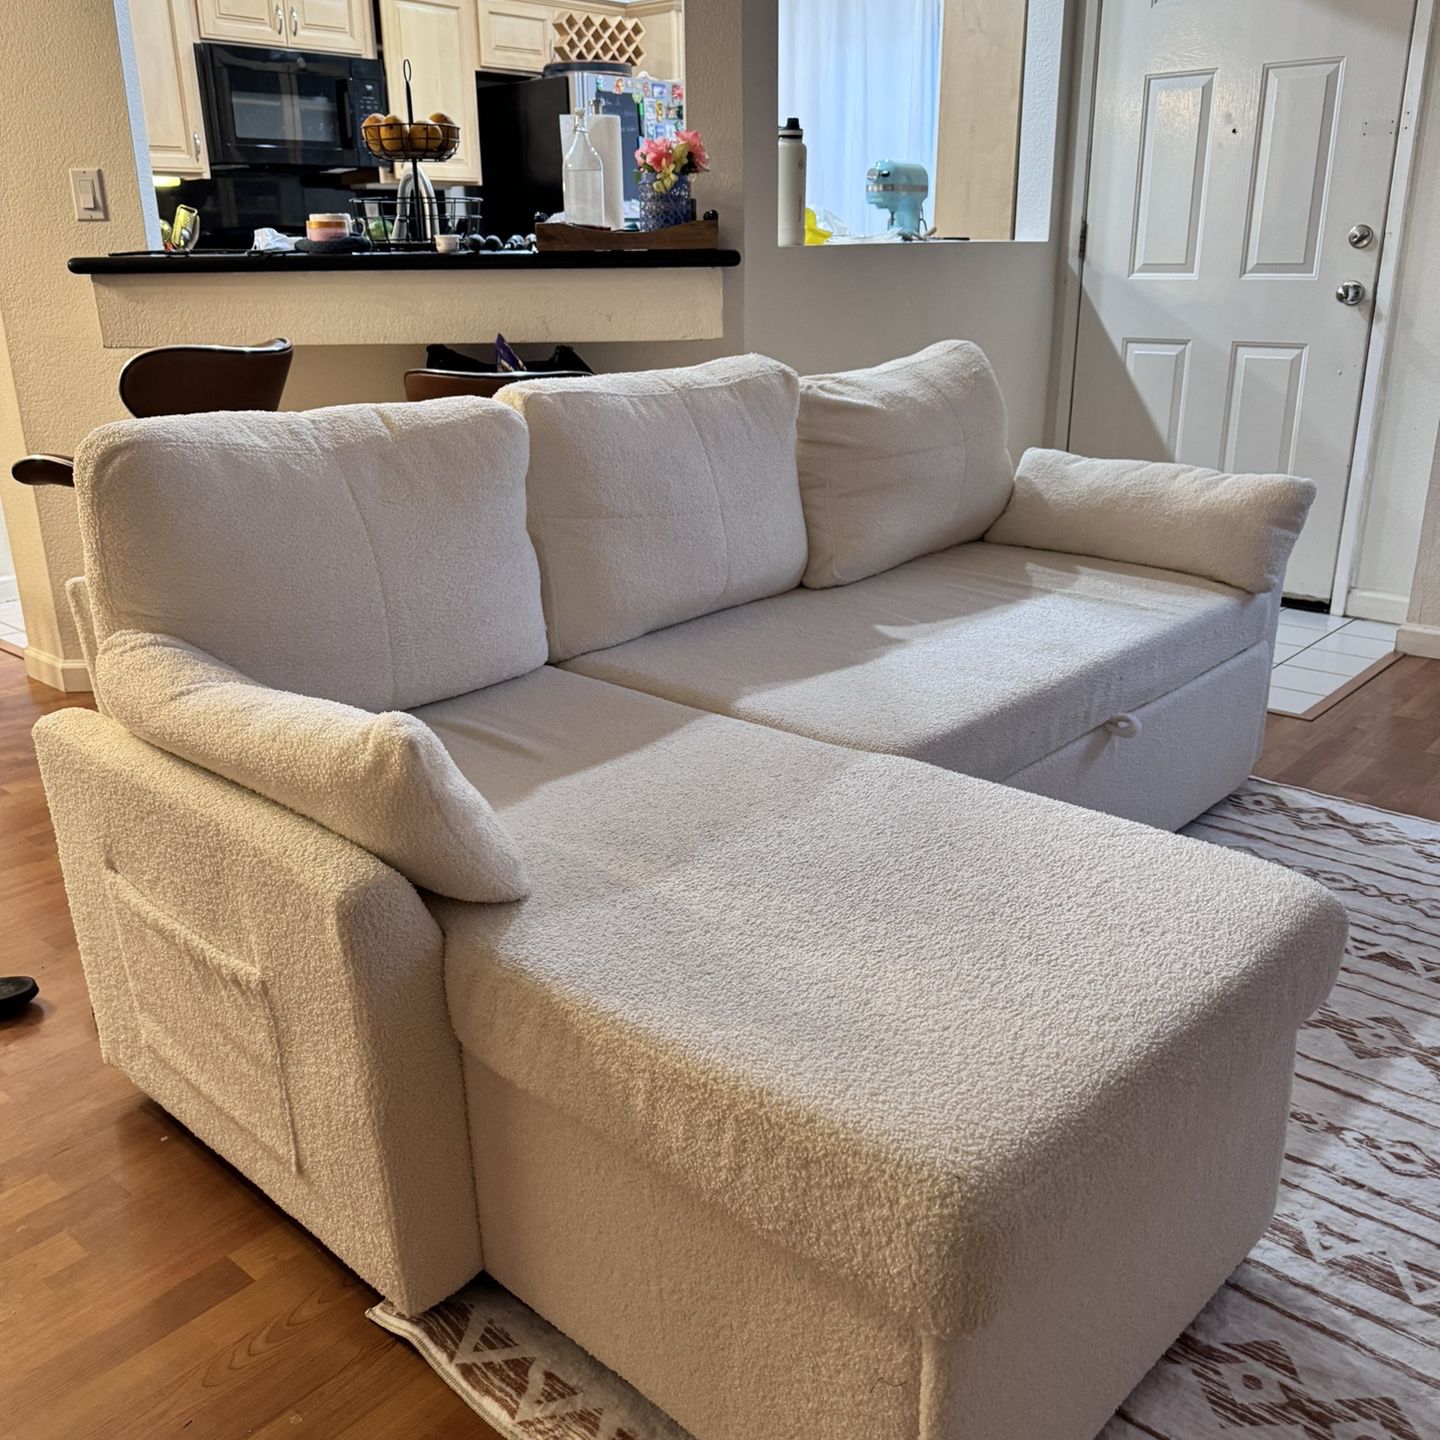 Selling Cozy Sleeper Couch